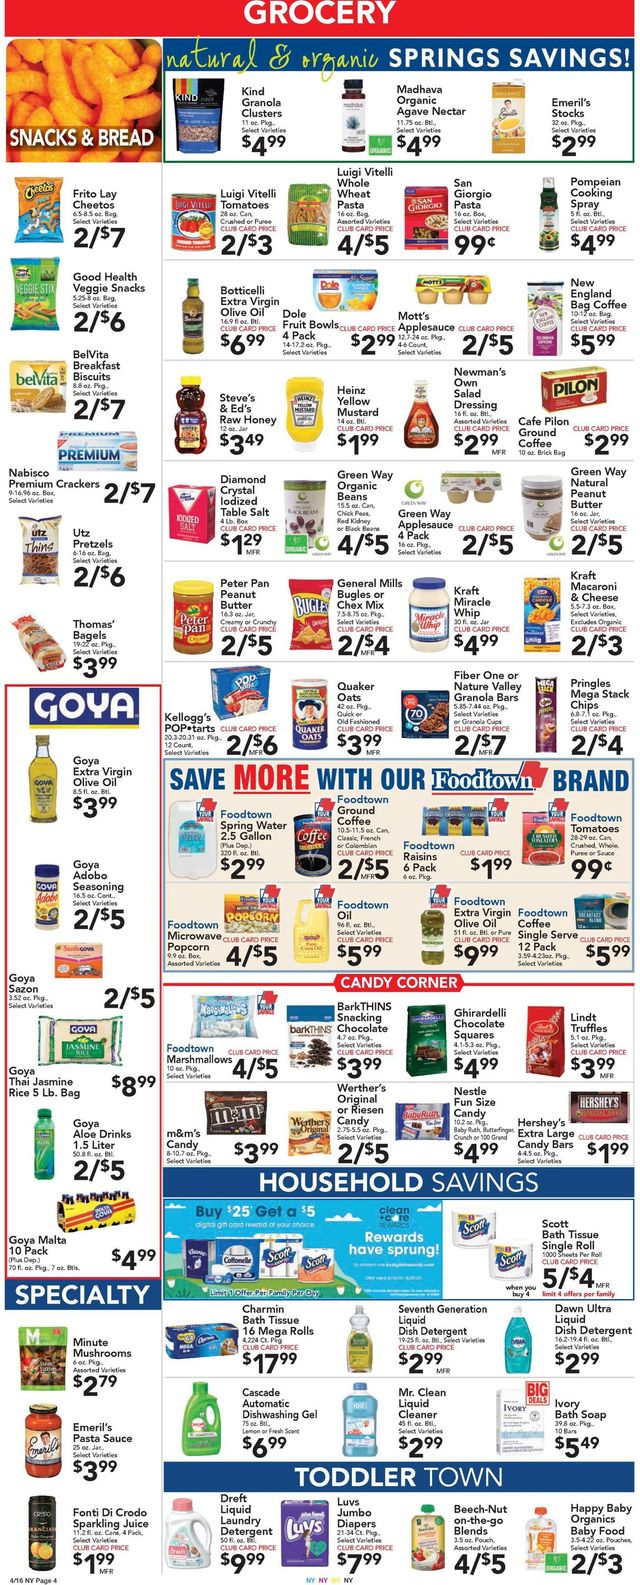 Foodtown Ad from 04/16/2021